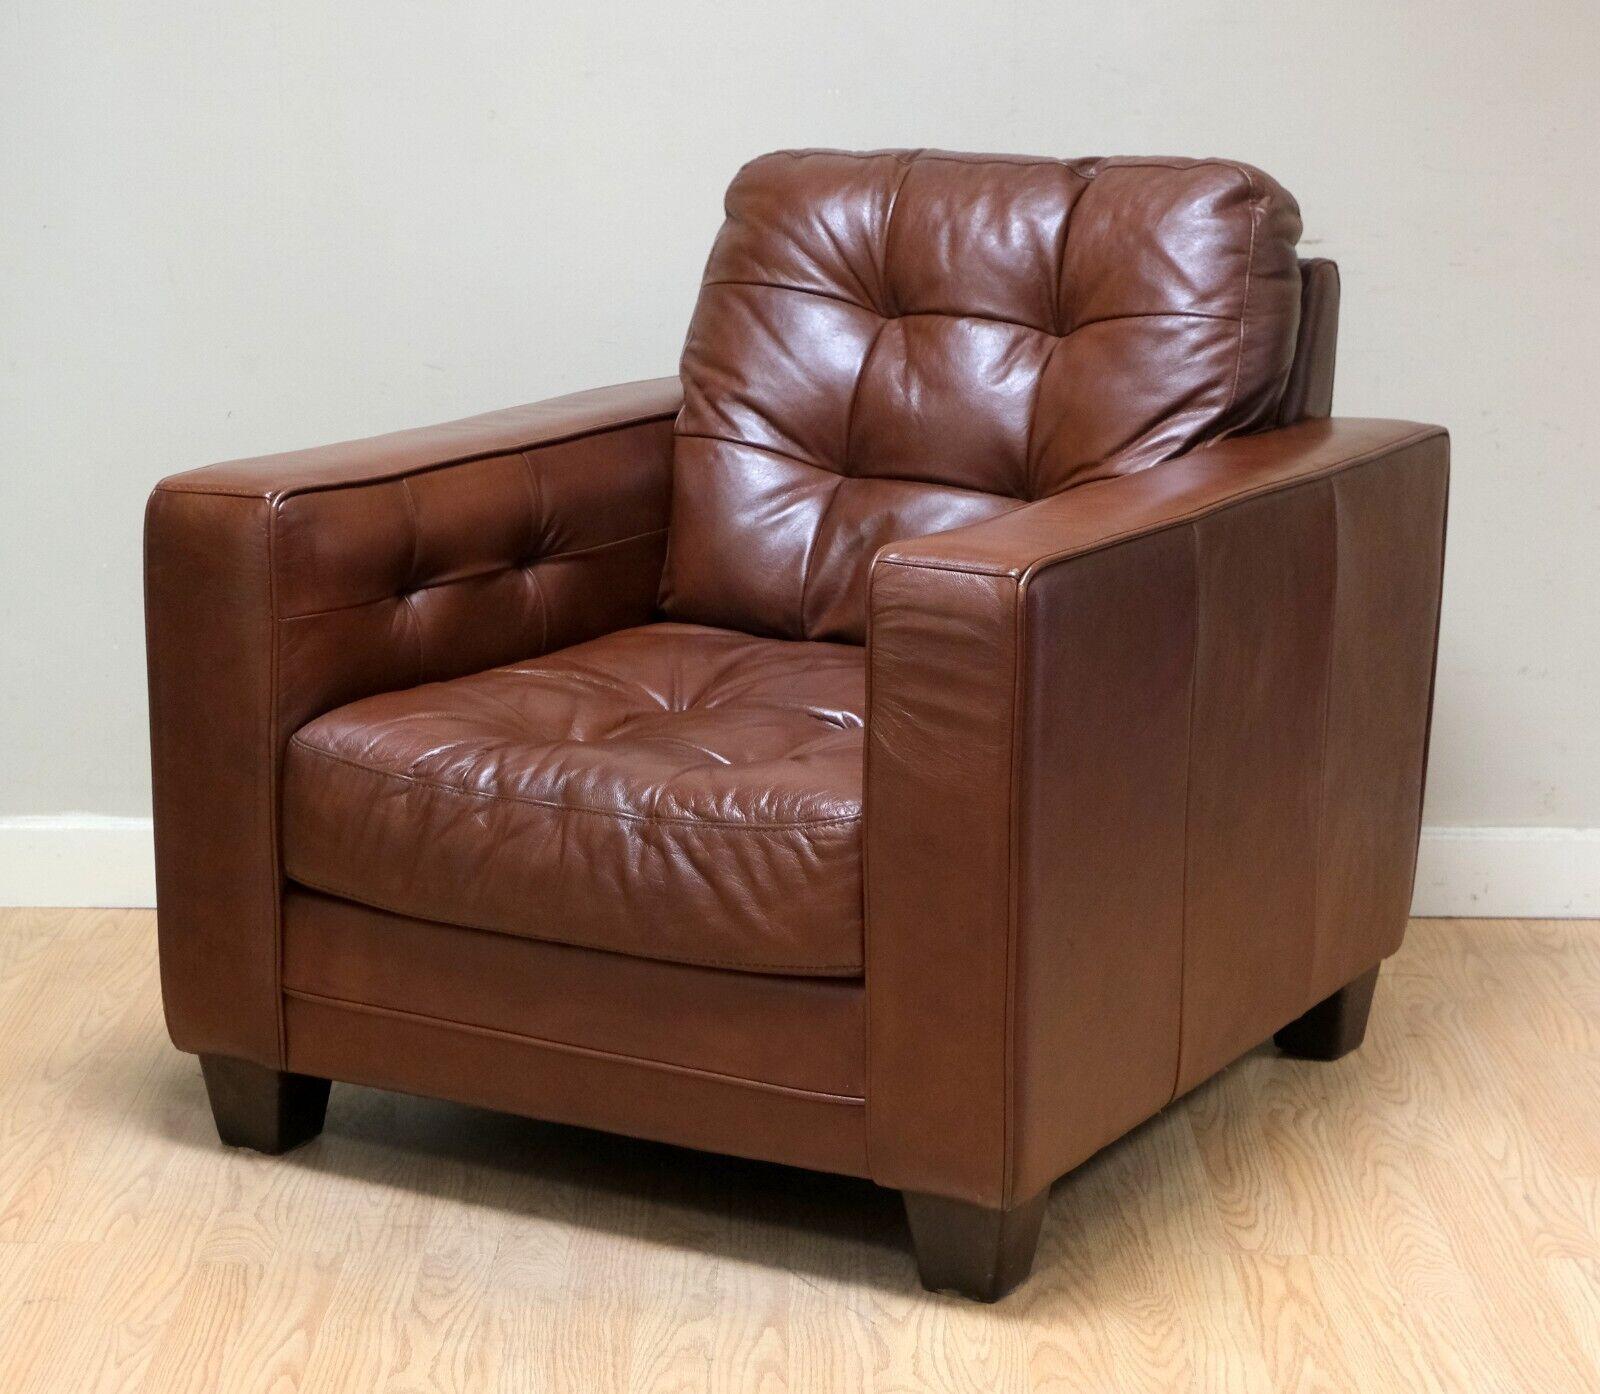 Hand-Crafted AGED KNOLL STYLE BROWN LEATHER ARMCHAIR CHESTERFIELD STYLE BUTTONING TRACK ARMs For Sale